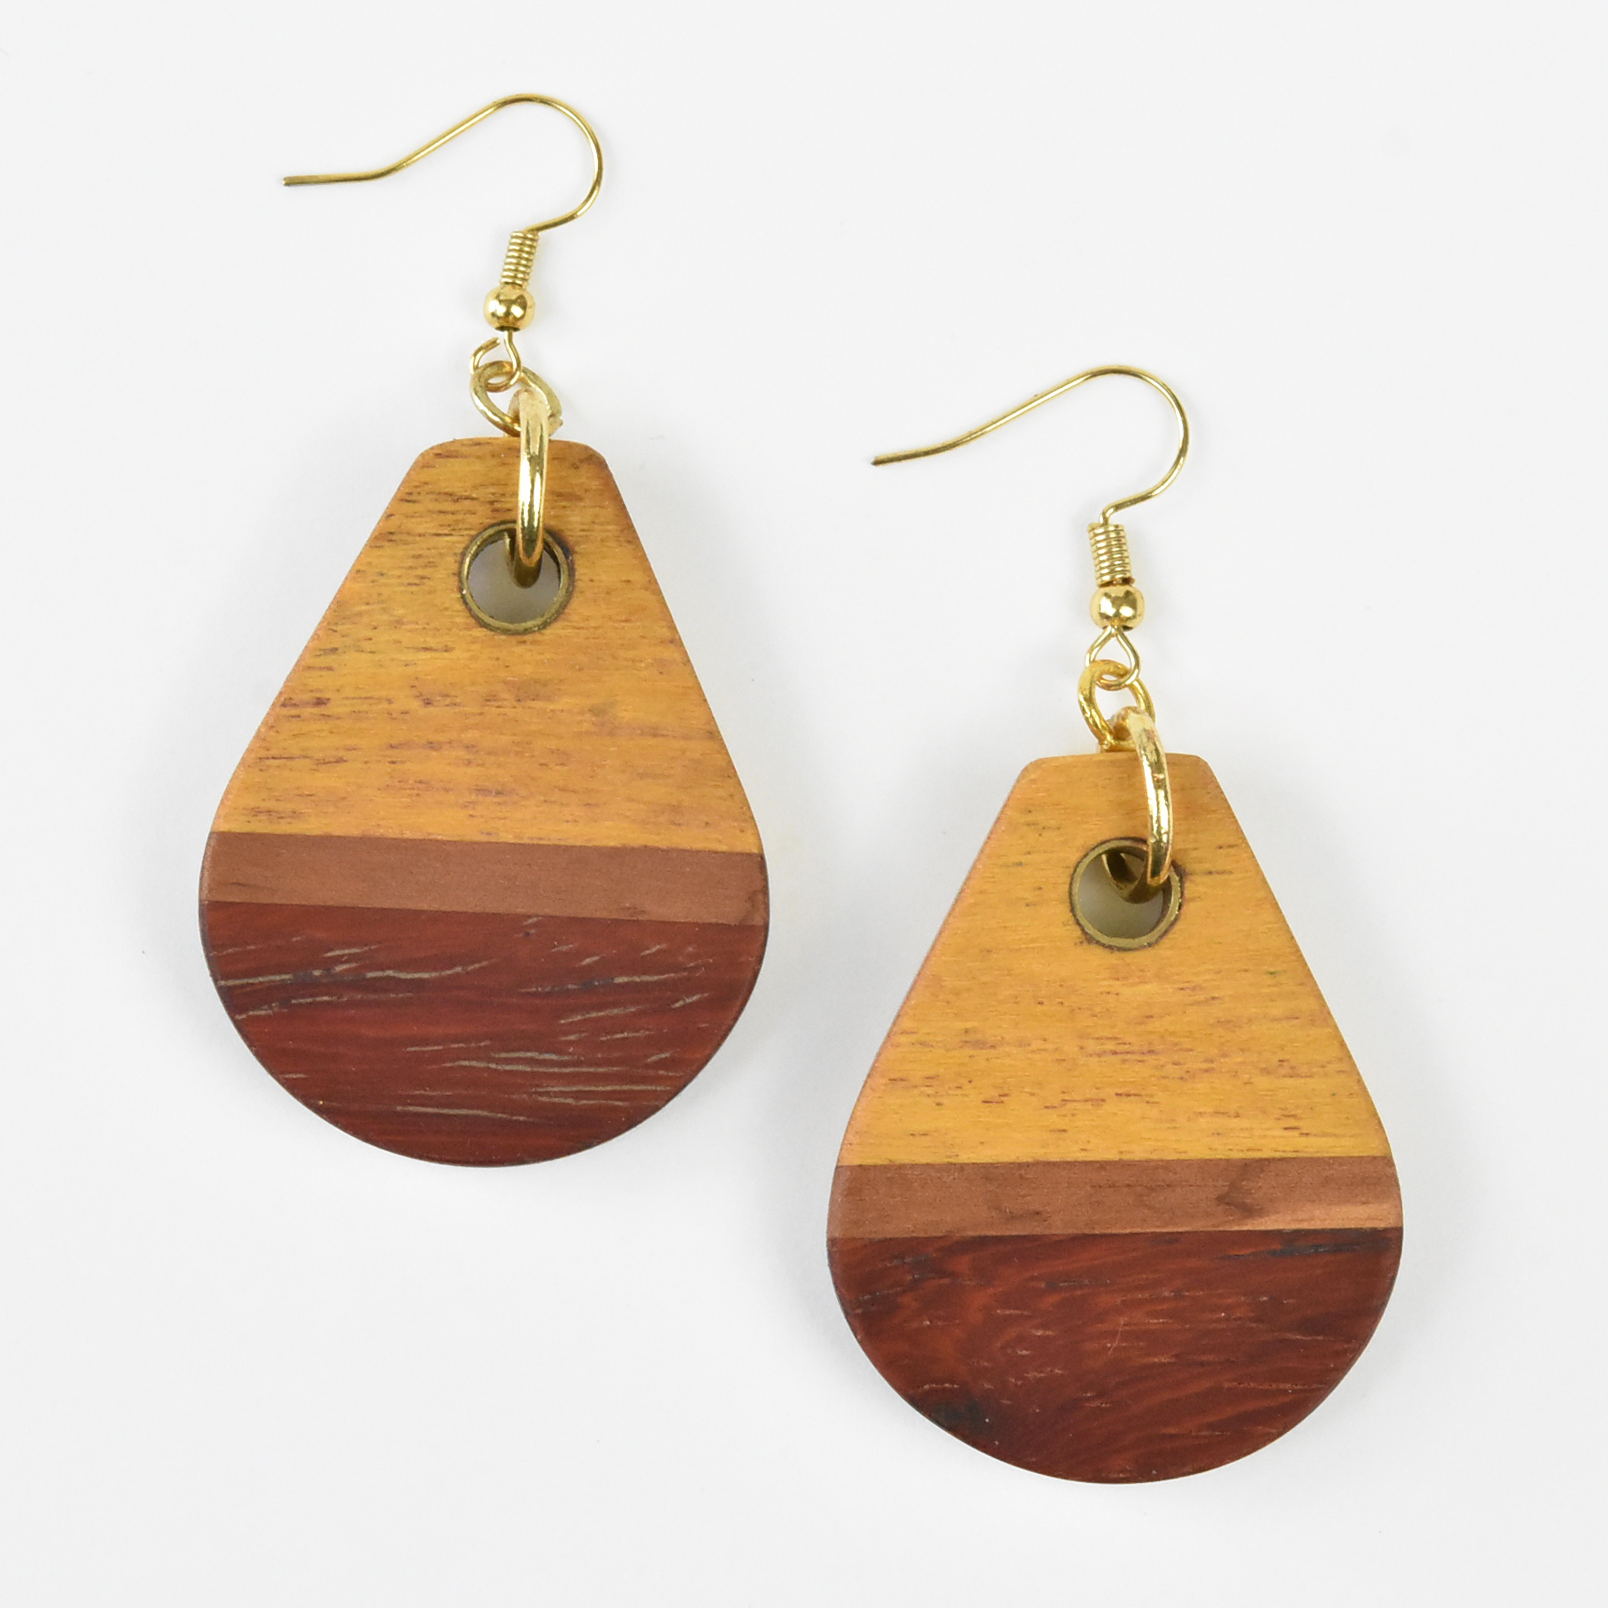 Wooden Earrings - Handmade Gift - Wood4home - Wooden Jewelry, Souvenirs,  Furnishings